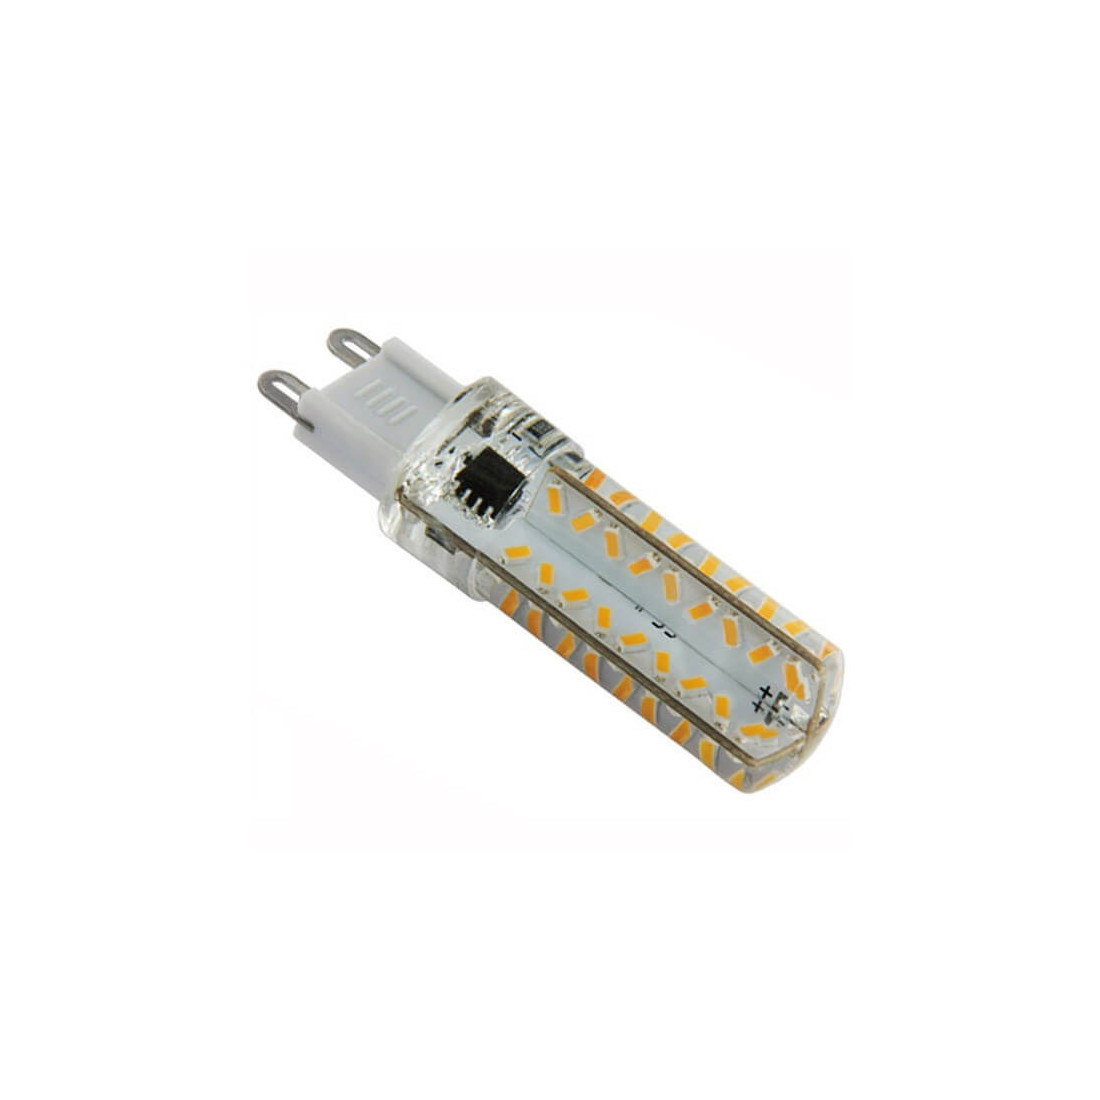 Ampoule Piccoled Dimmable culot G9 - 230 volts 72 LED